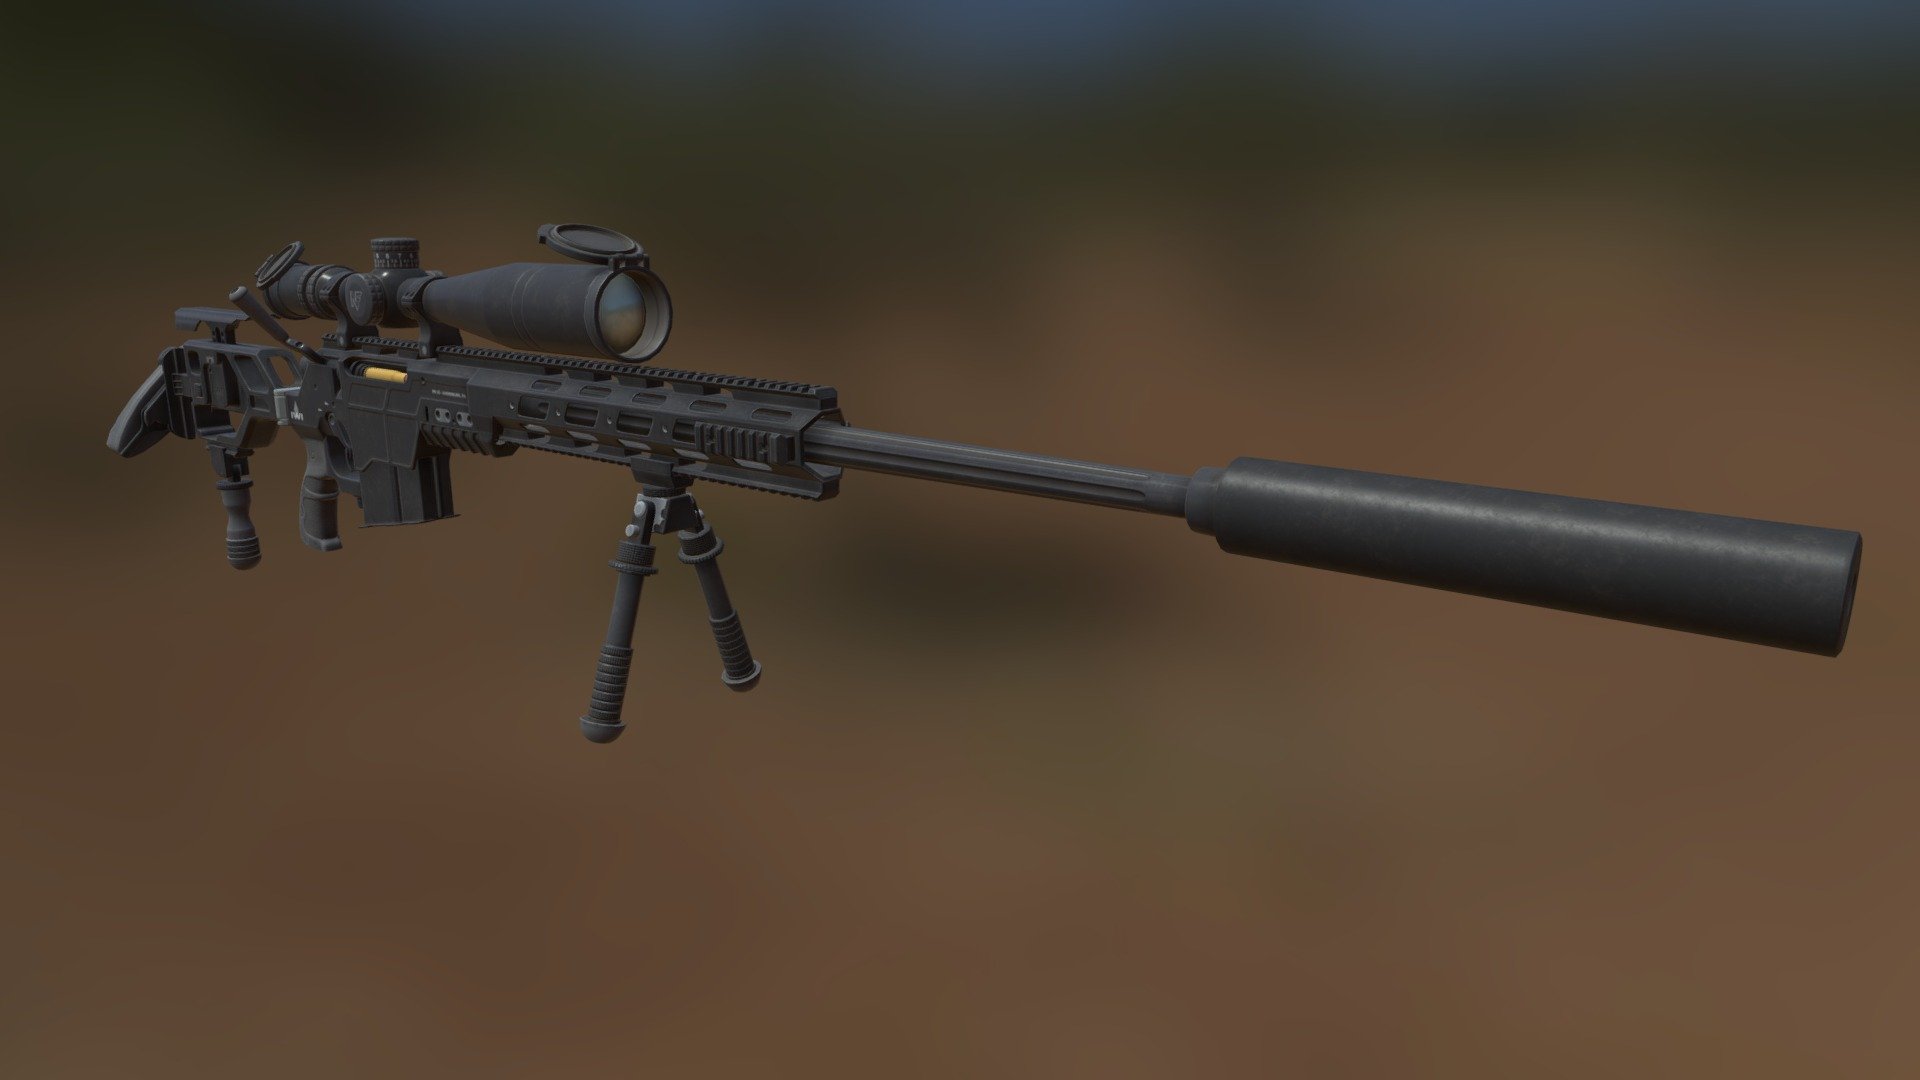 18852 TRIS

Israeli Iwi Dan .338 Sniper Rifle 3D Prop Game Ready Asset

This weapon model has been built for a first person genre,

Changeable - Mag
Changeable - Muzzle / Silencer
Foldable - Stock
Rotatable / Adjustable - Stock Pad
Adjustable - Stock Chin Pad
Rotatable / Changeable - Mono-pod / Bi-pod
Rotatable / Moveable - Bolt
Rotatable - Scope End Caps
Changeable - Scope - Iwi Dan .338 Sniper Rifle - 3D model by Kestutis Jankunas (@Kestutis) 3d model